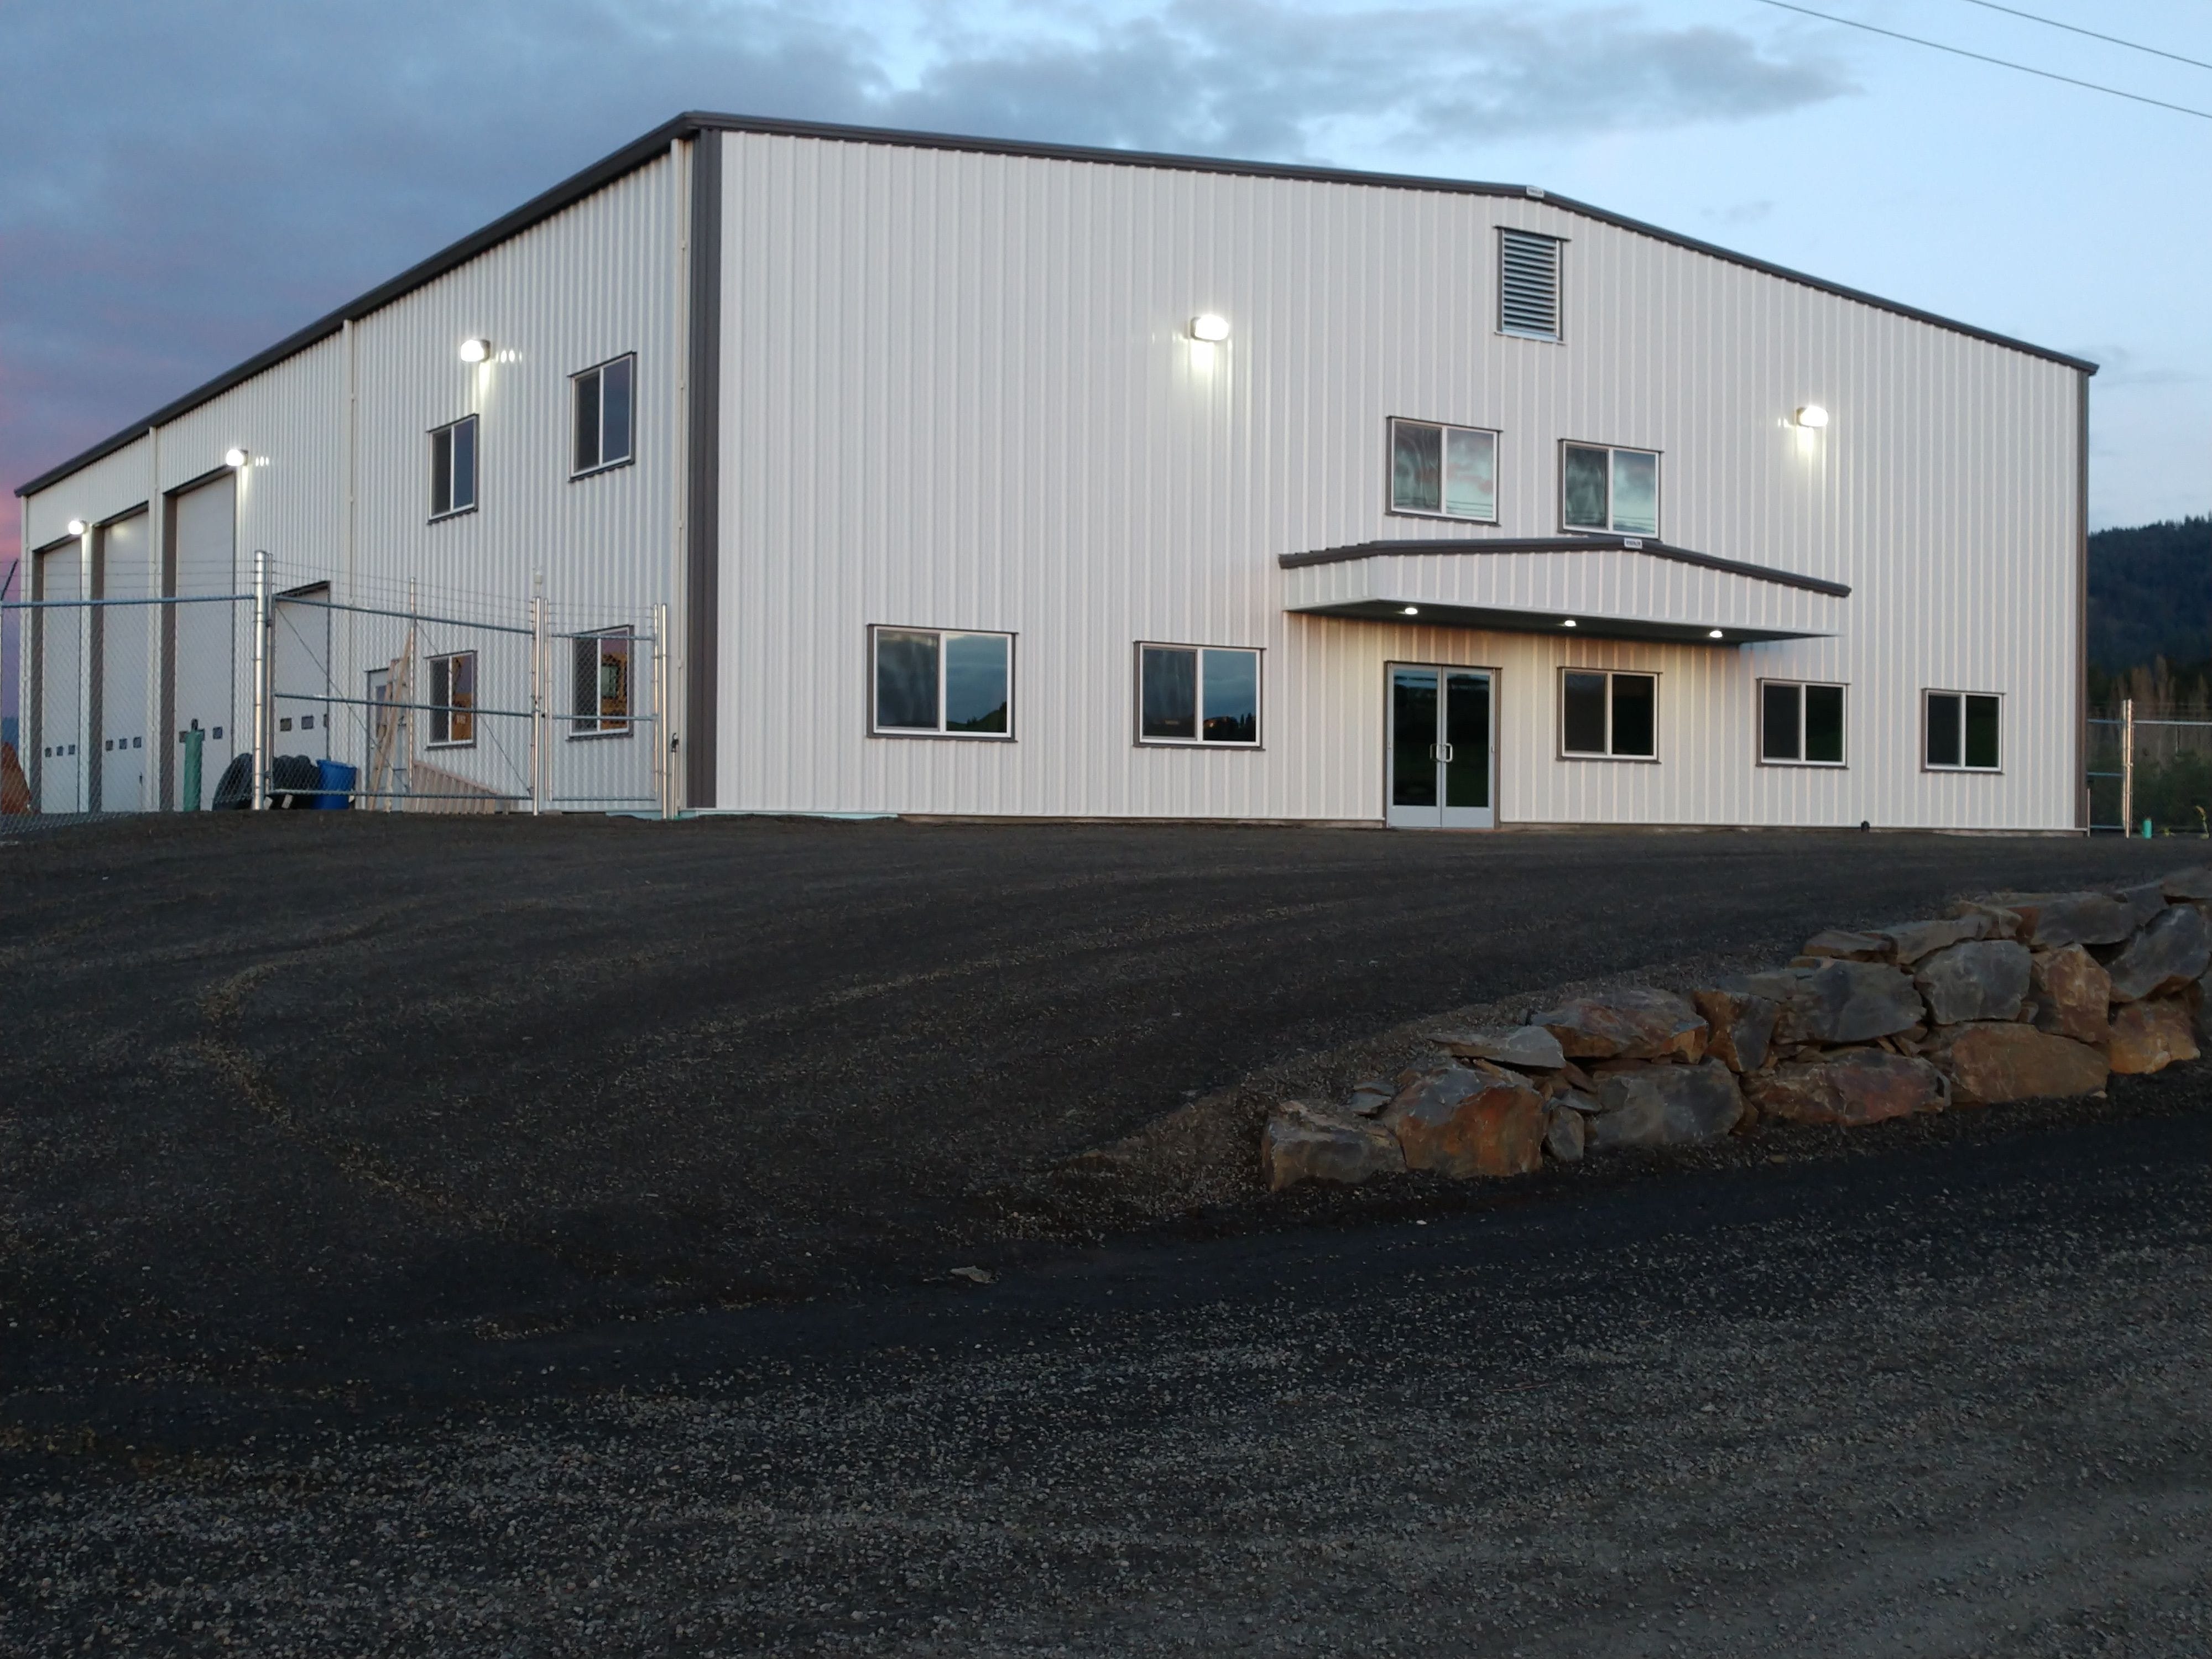 Excavation company shop and offices utilizing a steel building in Grangeville Idaho.